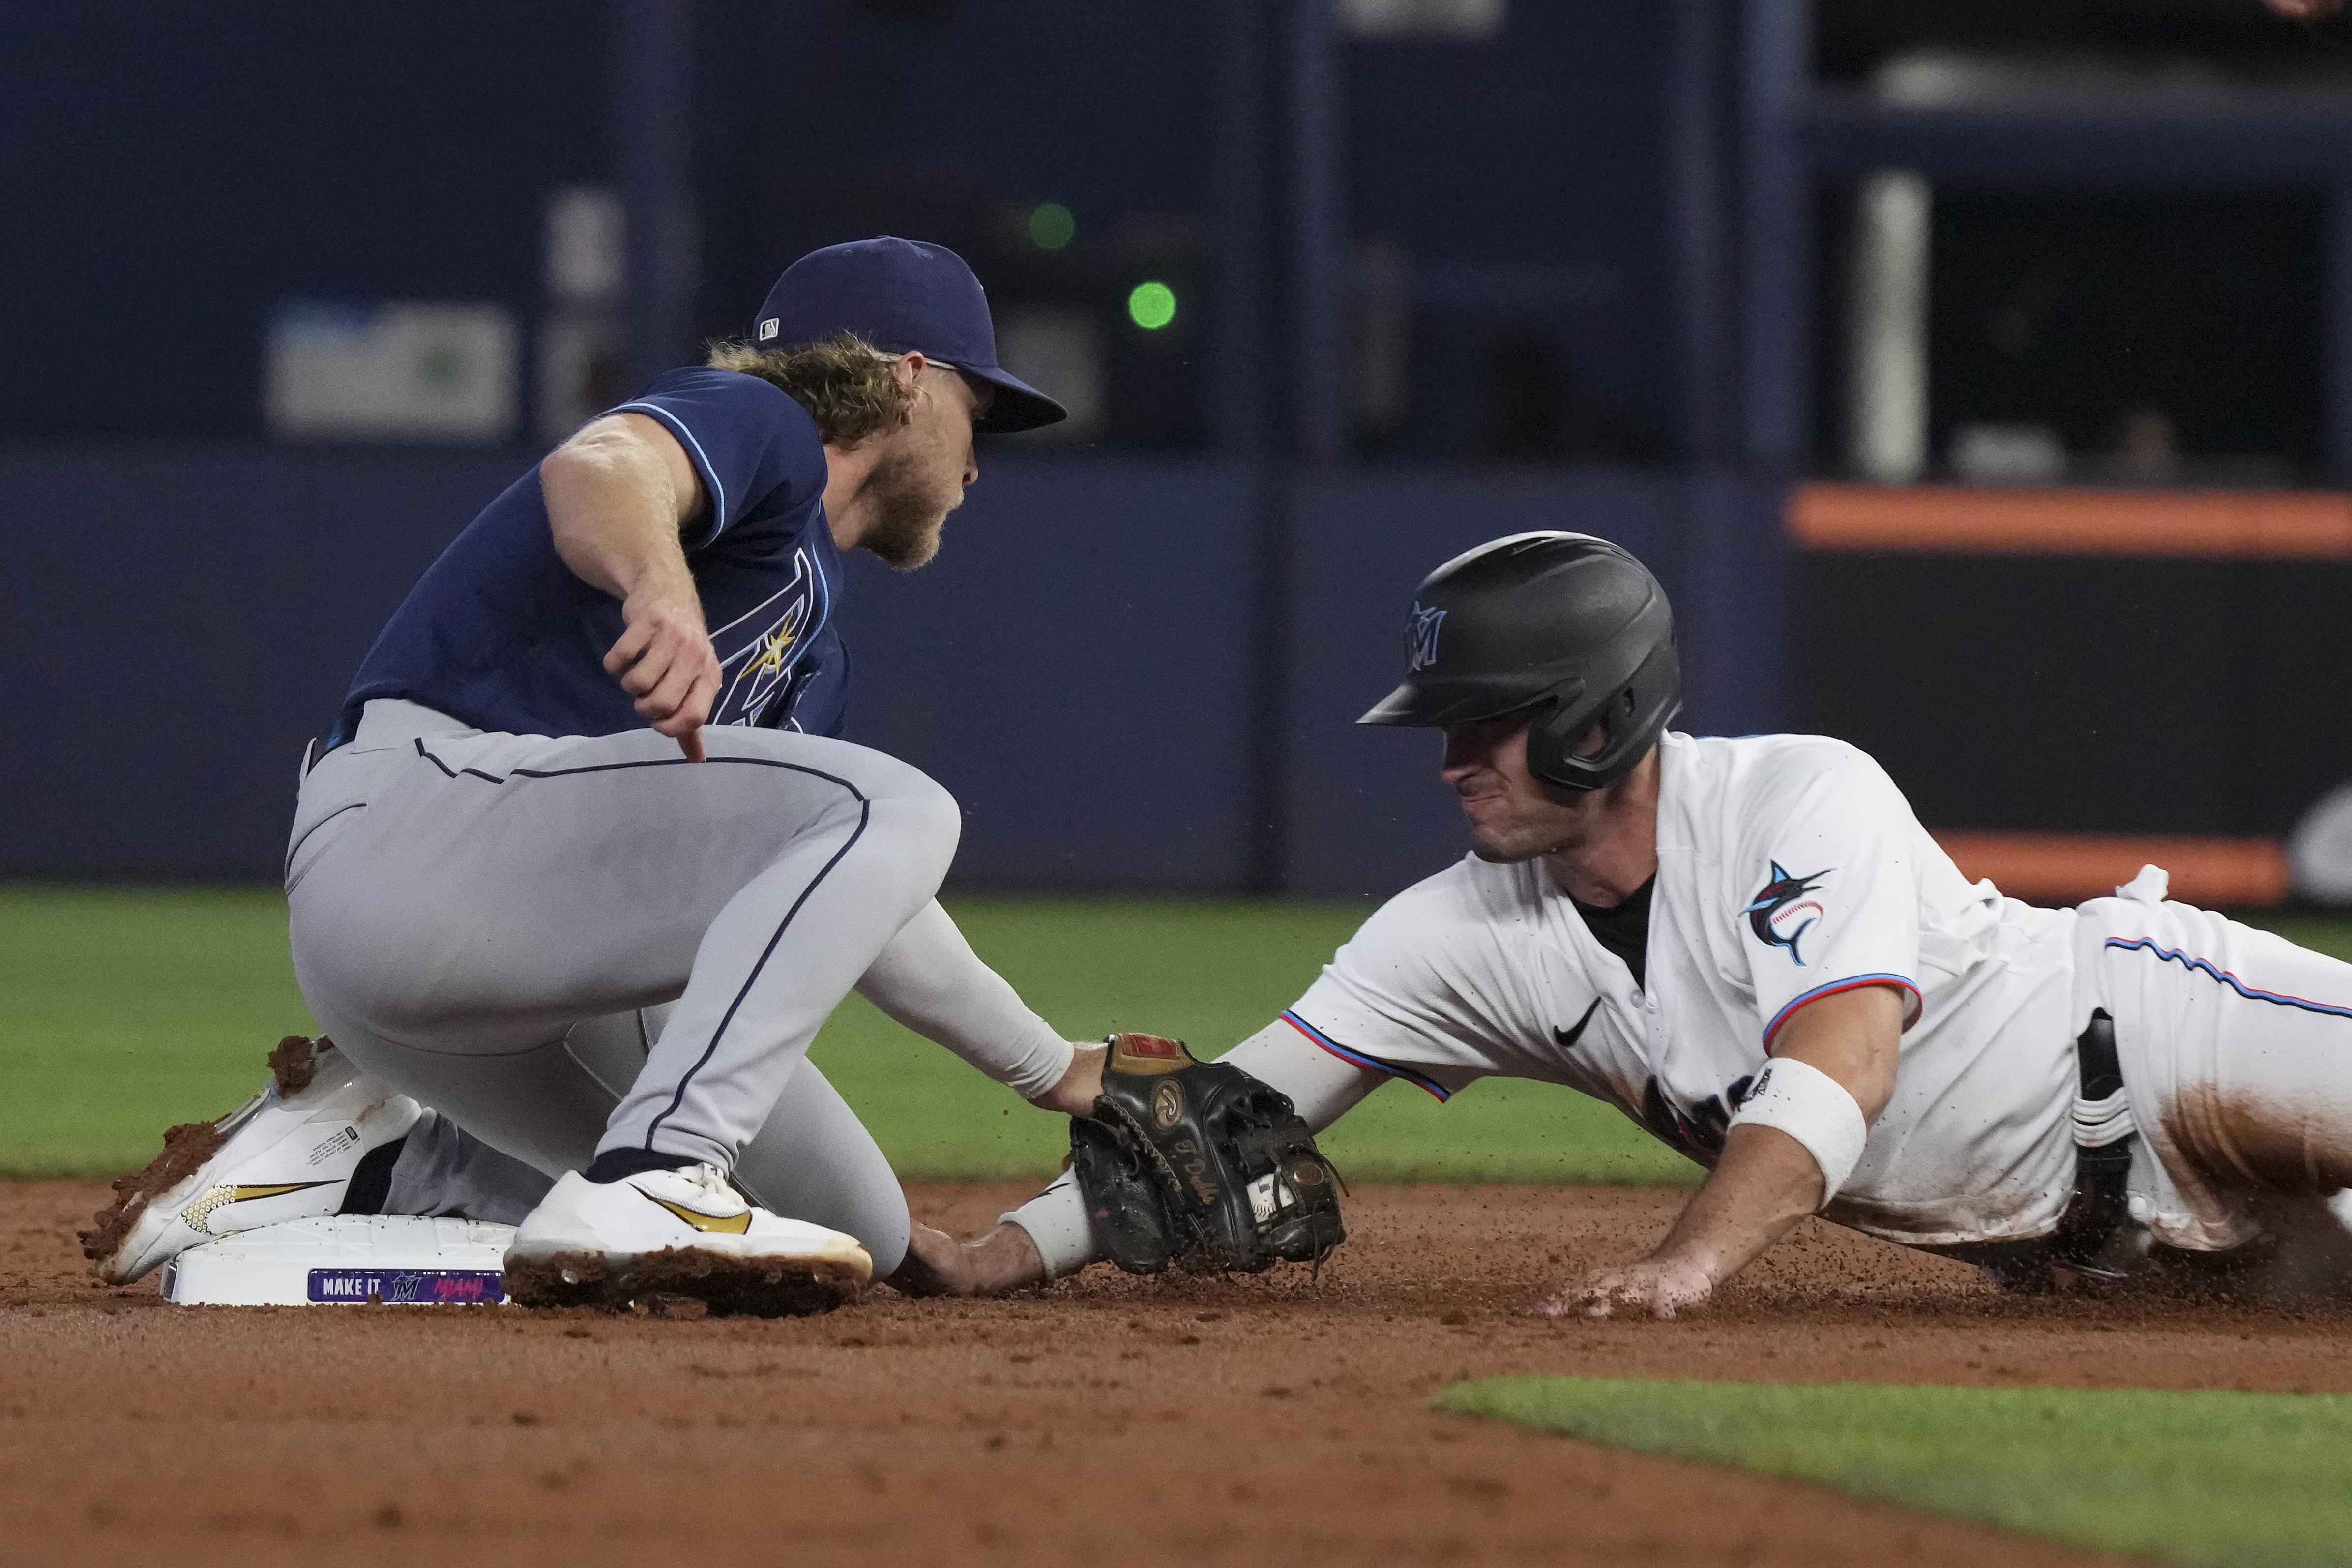 Nick Fortes #54 of the Miami Marlins is caught stealing second base by Taylor Walls #0 of the Tampa Bay Rays in the second inning at loanDepot park on August 30, 2022 in Miami, Florida.